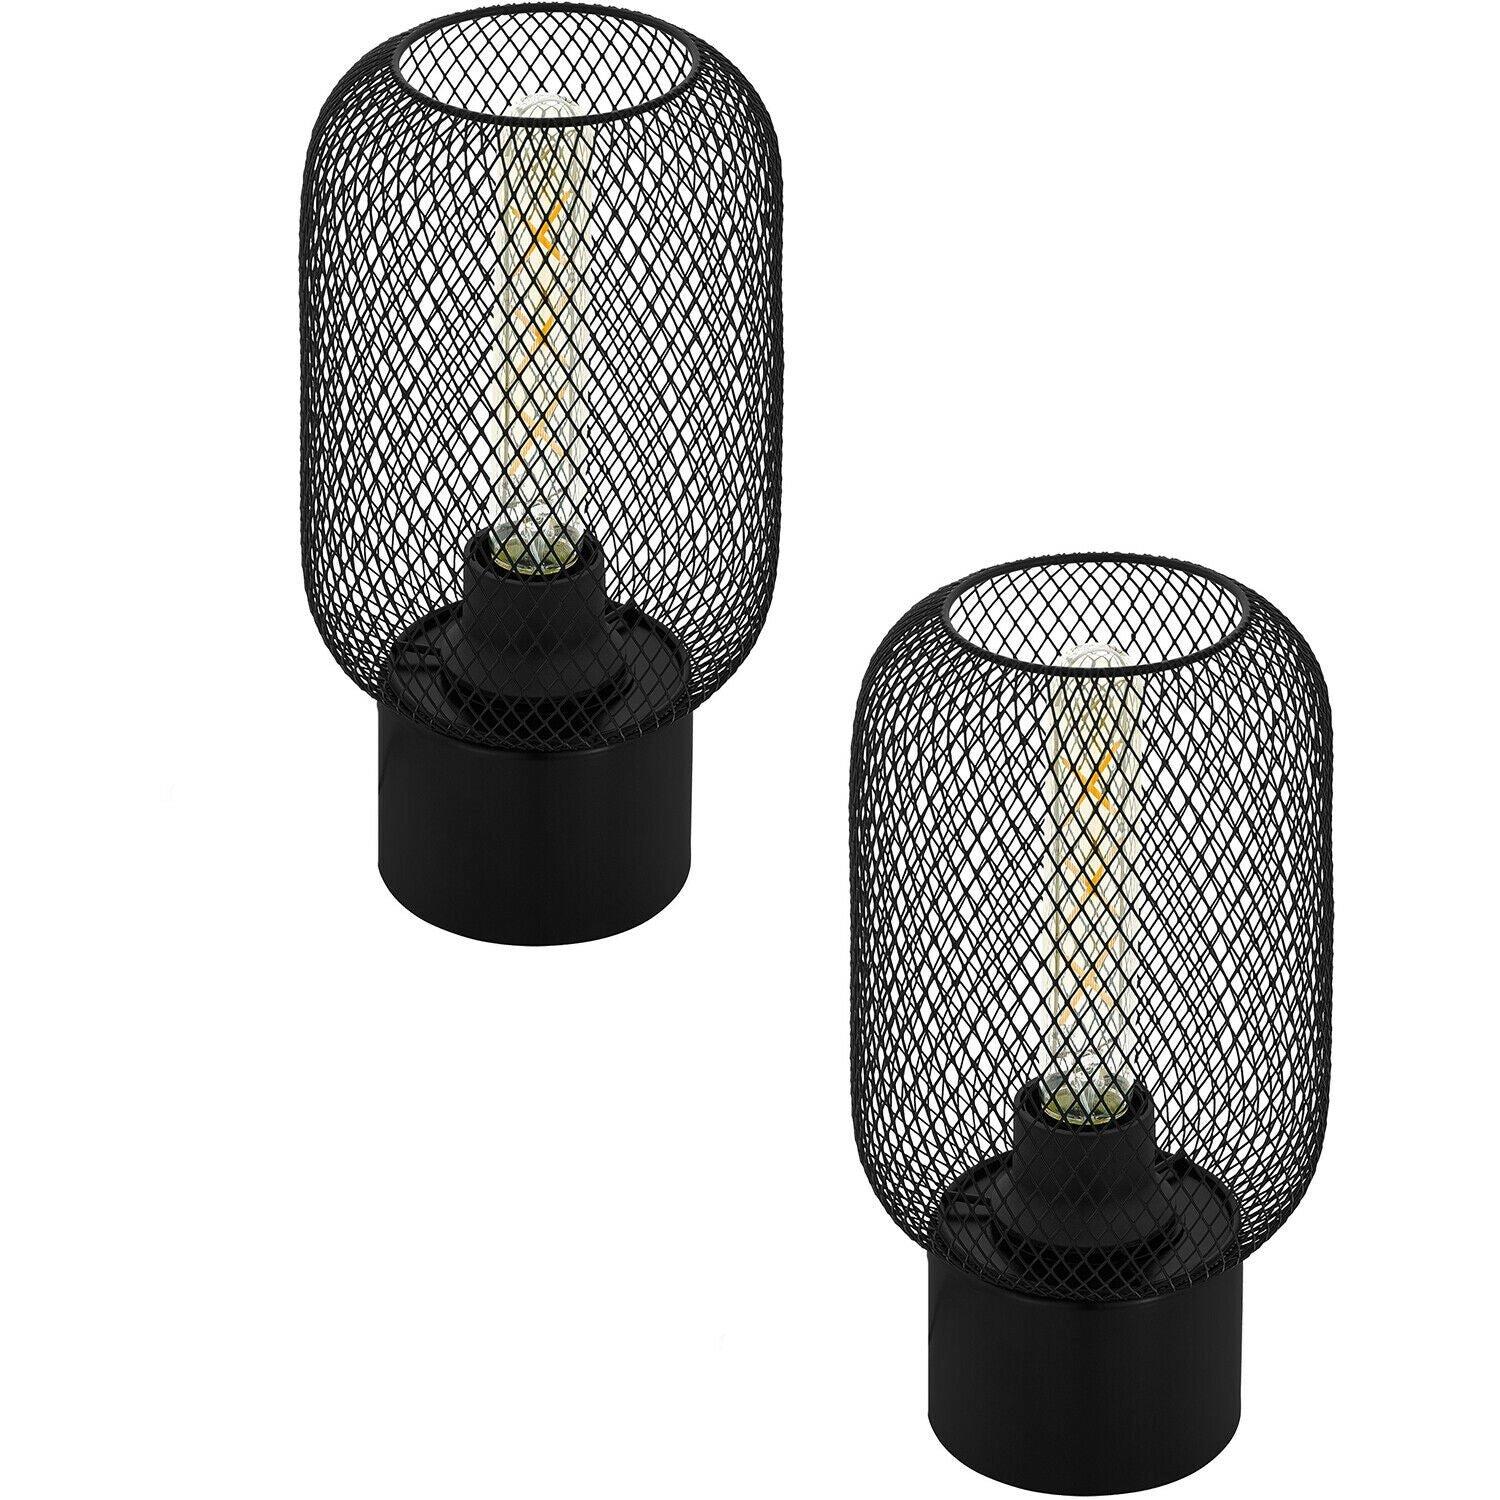 2 PACK Table Lamp Desk Light Black Steel Round Wire Mesh Shade 1x 60W E27